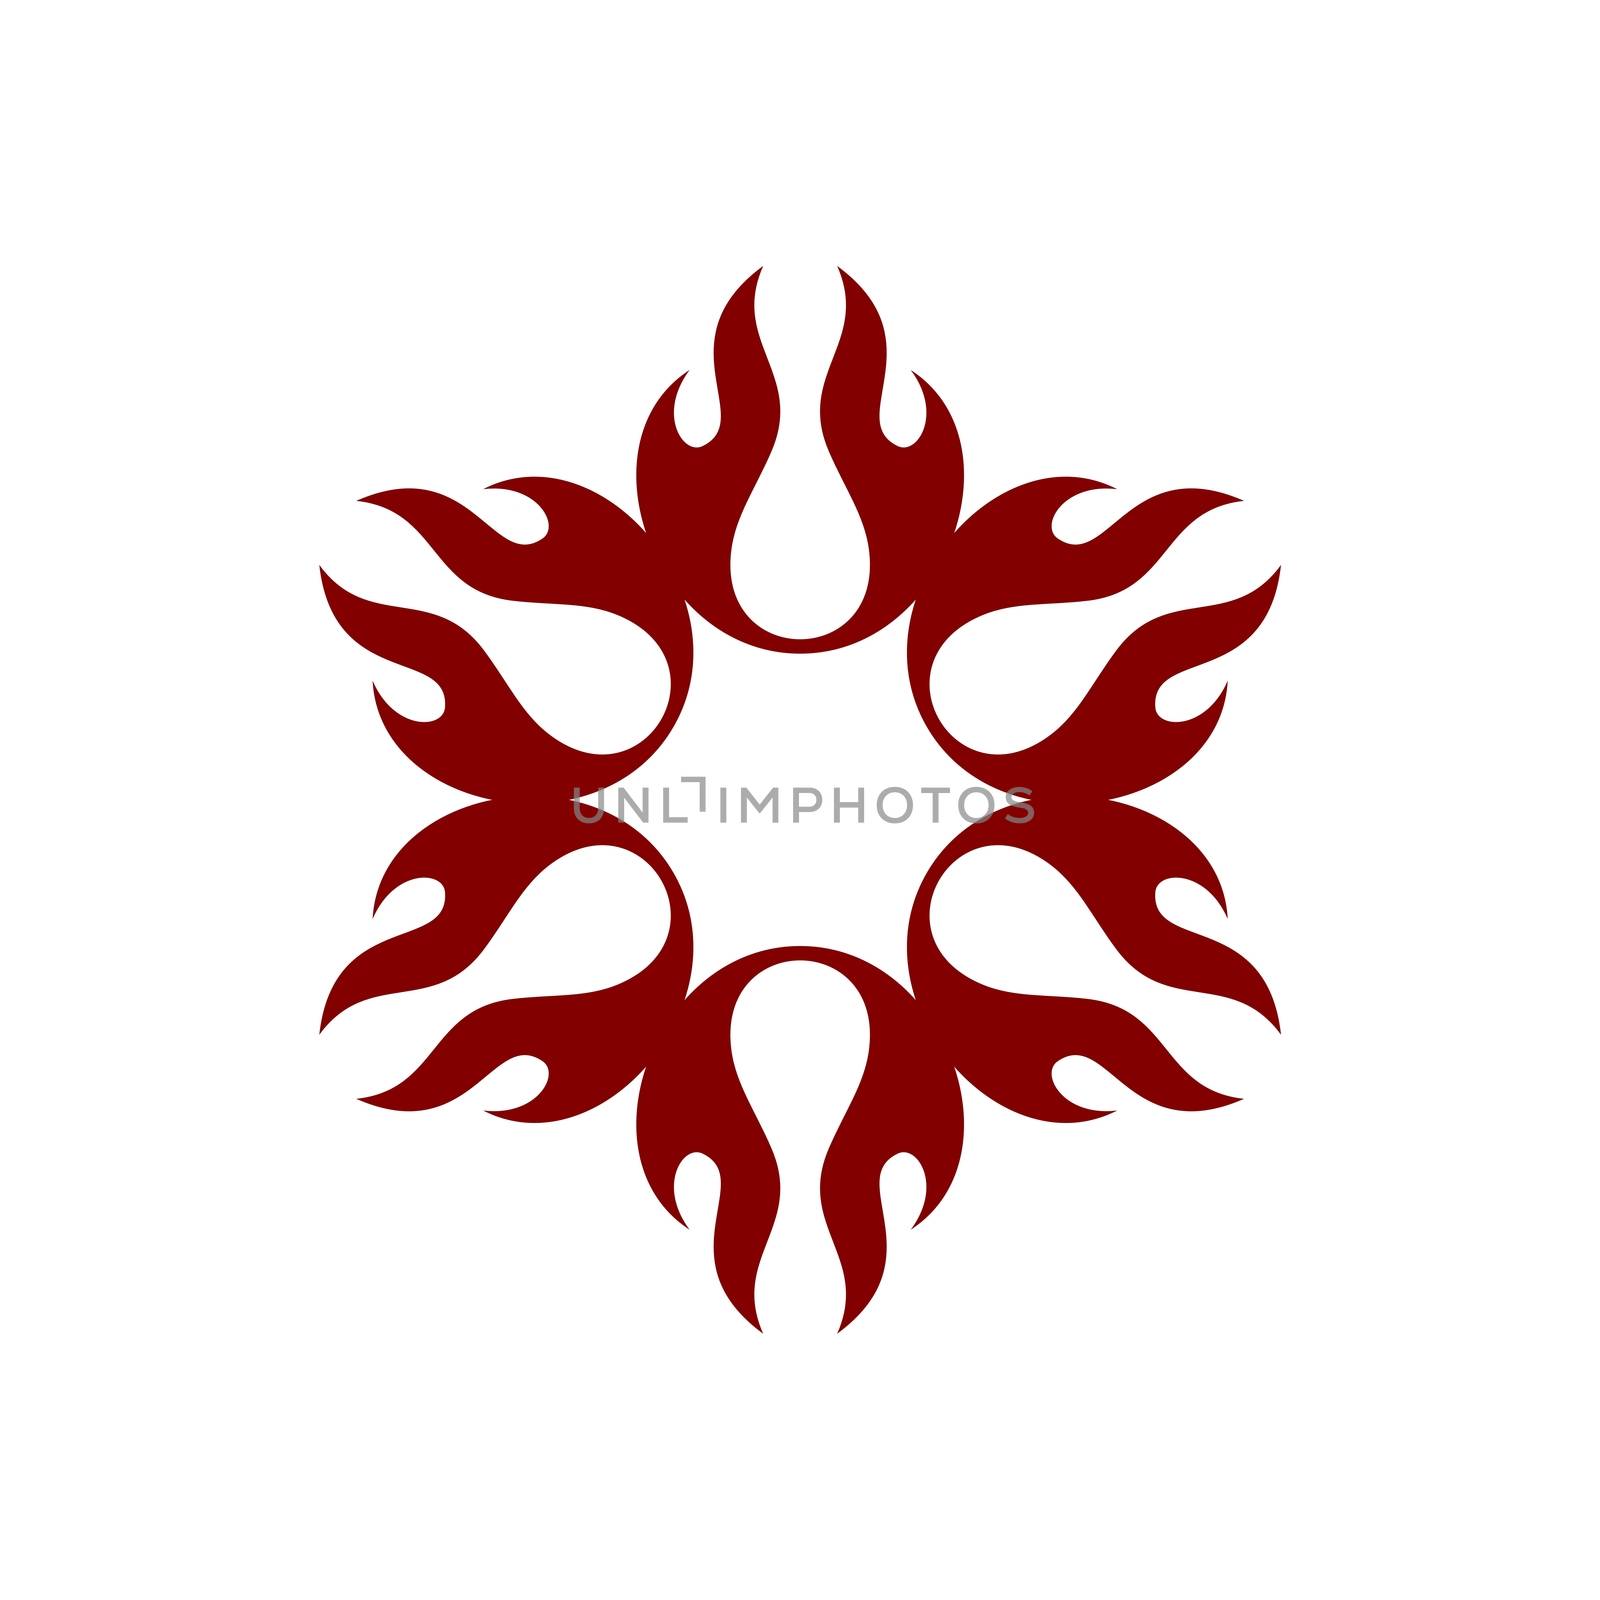 Red Flame Fire Flower Logo Template Illustration Design. Vector EPS 10. by soponyono1